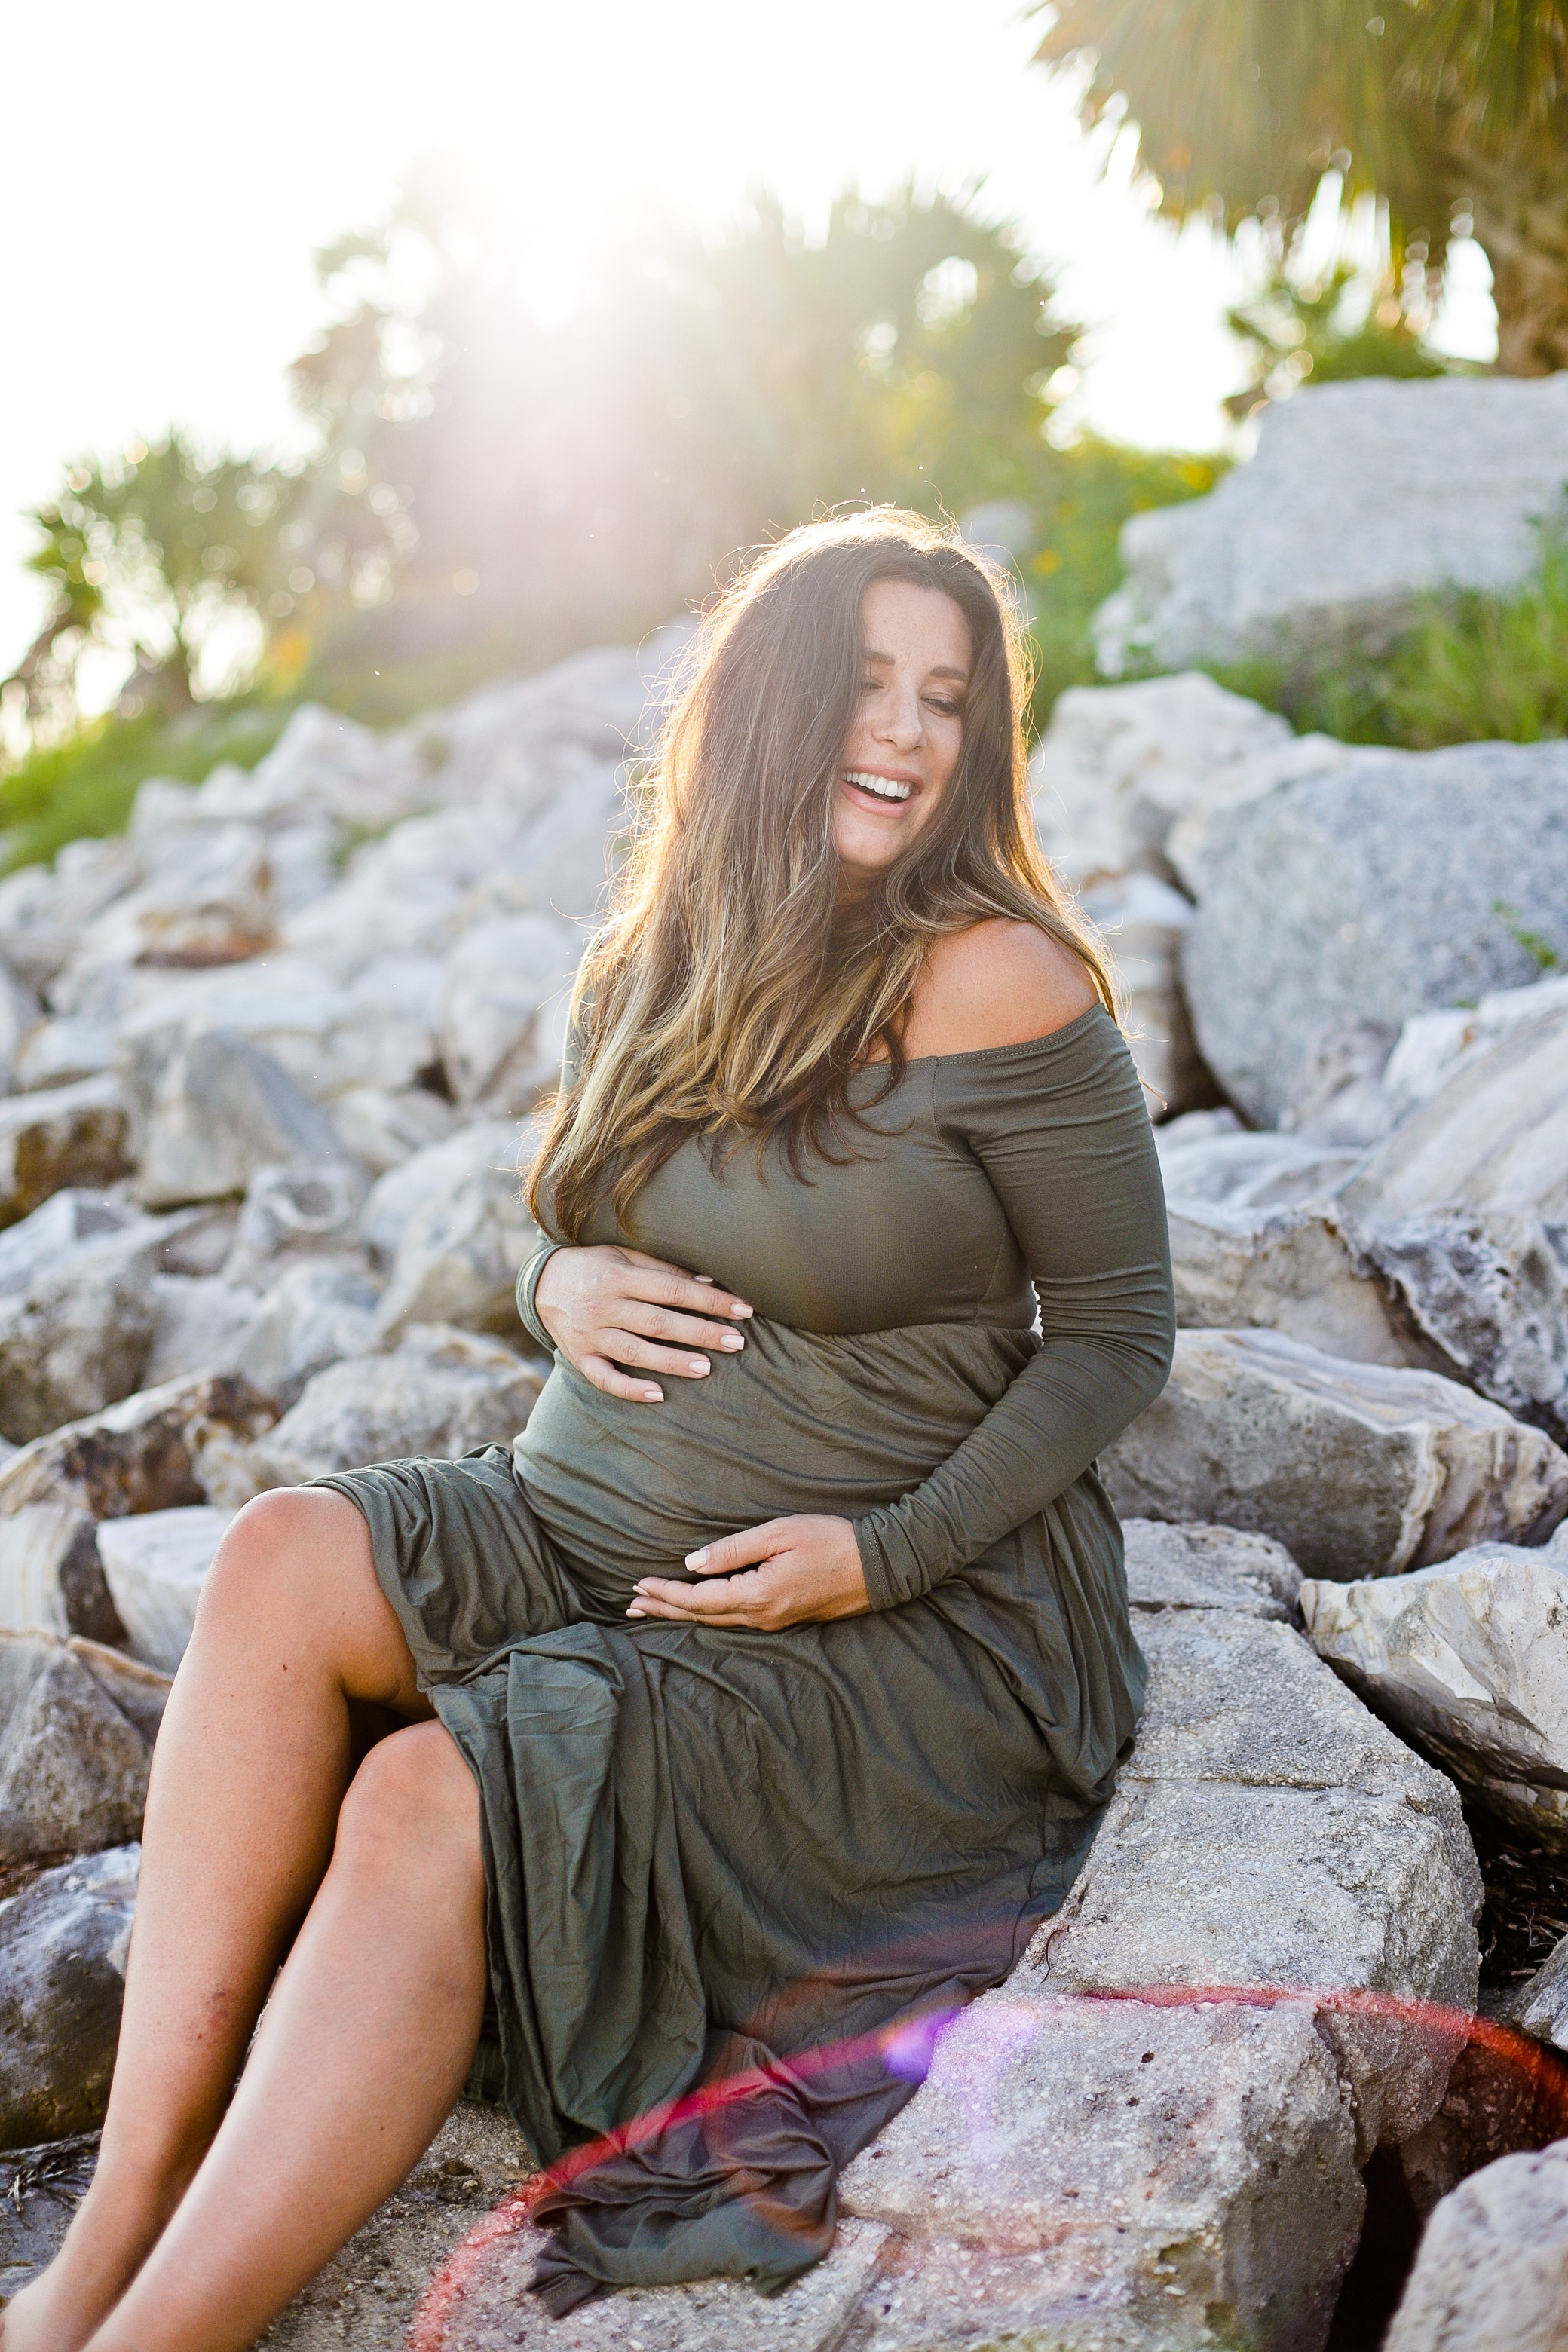 Twin Maternity Photos at the Beach | A Beach Maternity Photoshoot in Olive Green by popular Florida life and style blog, Fresh Mommy: image of a woman standing outside at the beach and wearing a Pink Blush Olive Solid Off Shoulder Maternity Maxi Dress.